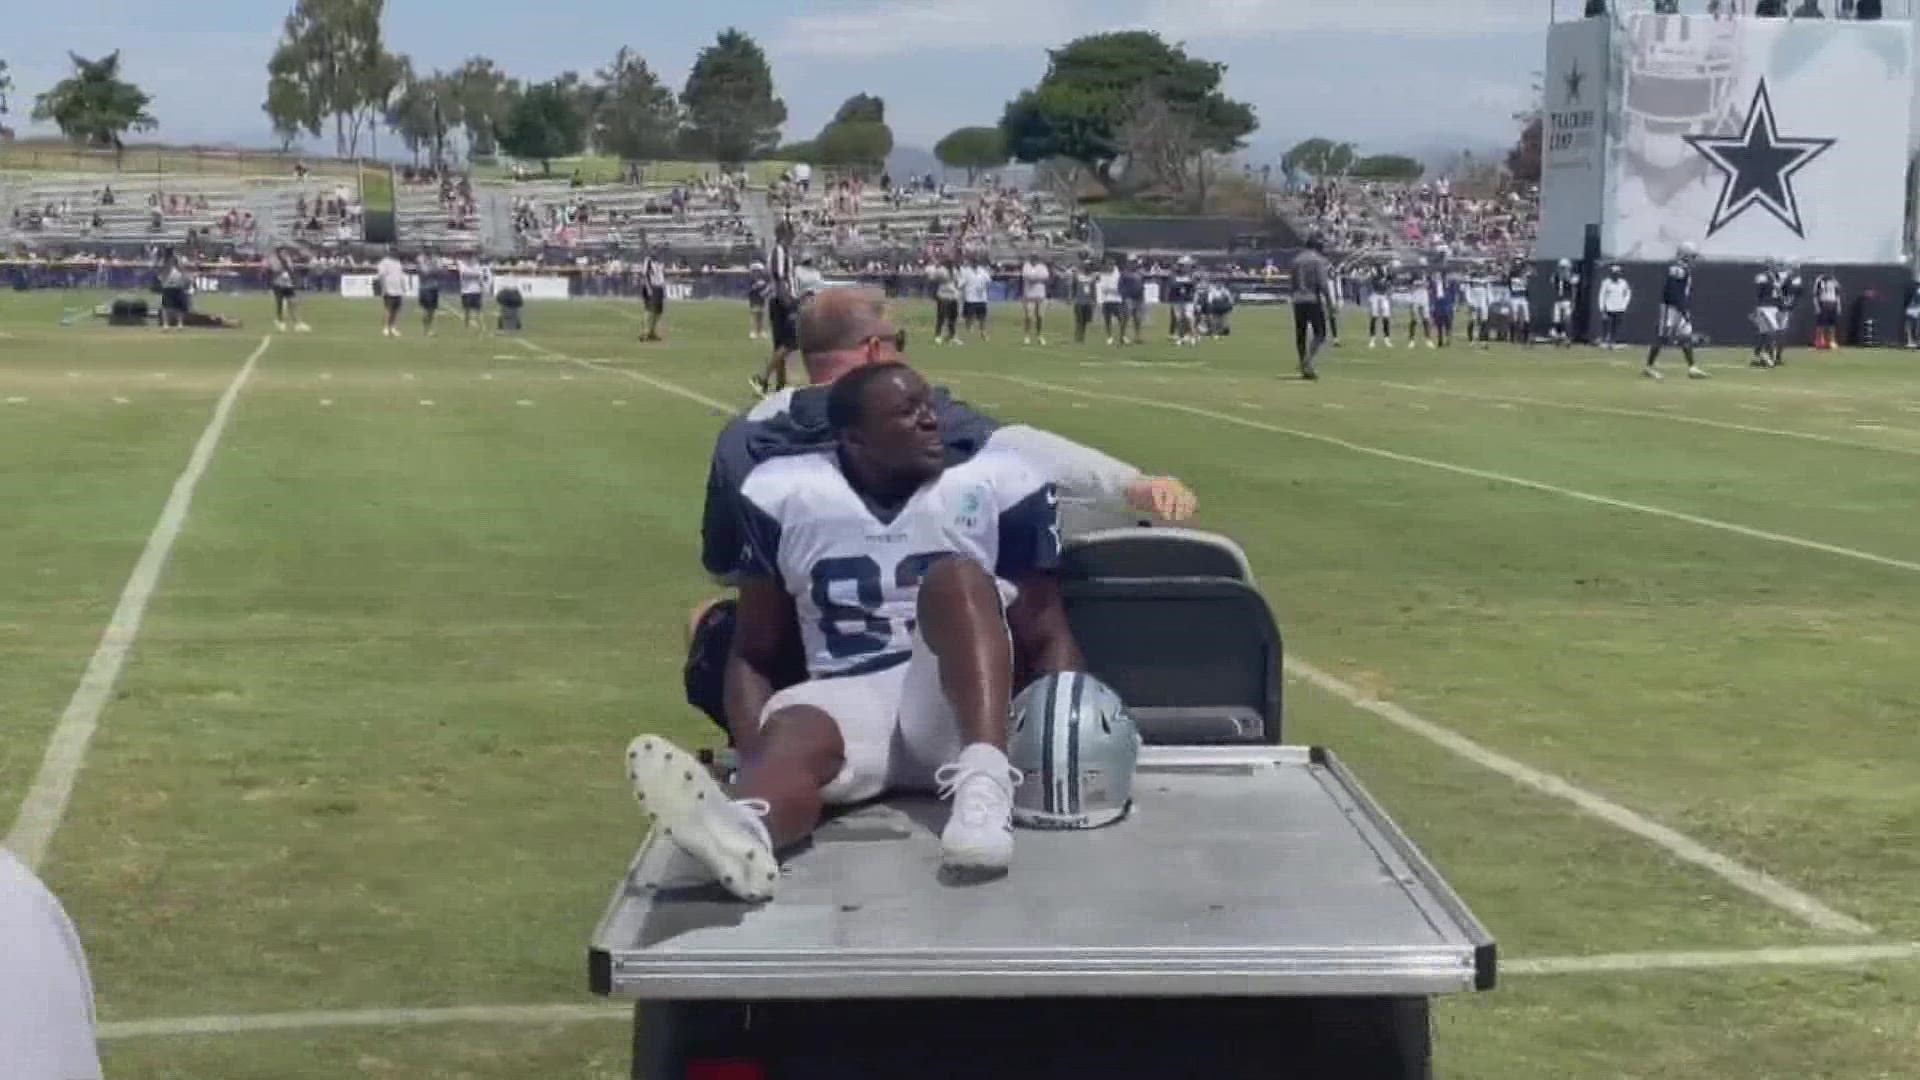 Dallas Cowboys wide receiver James Washington had to be carted off the field on Monday morning after injuring his right foot in practice.